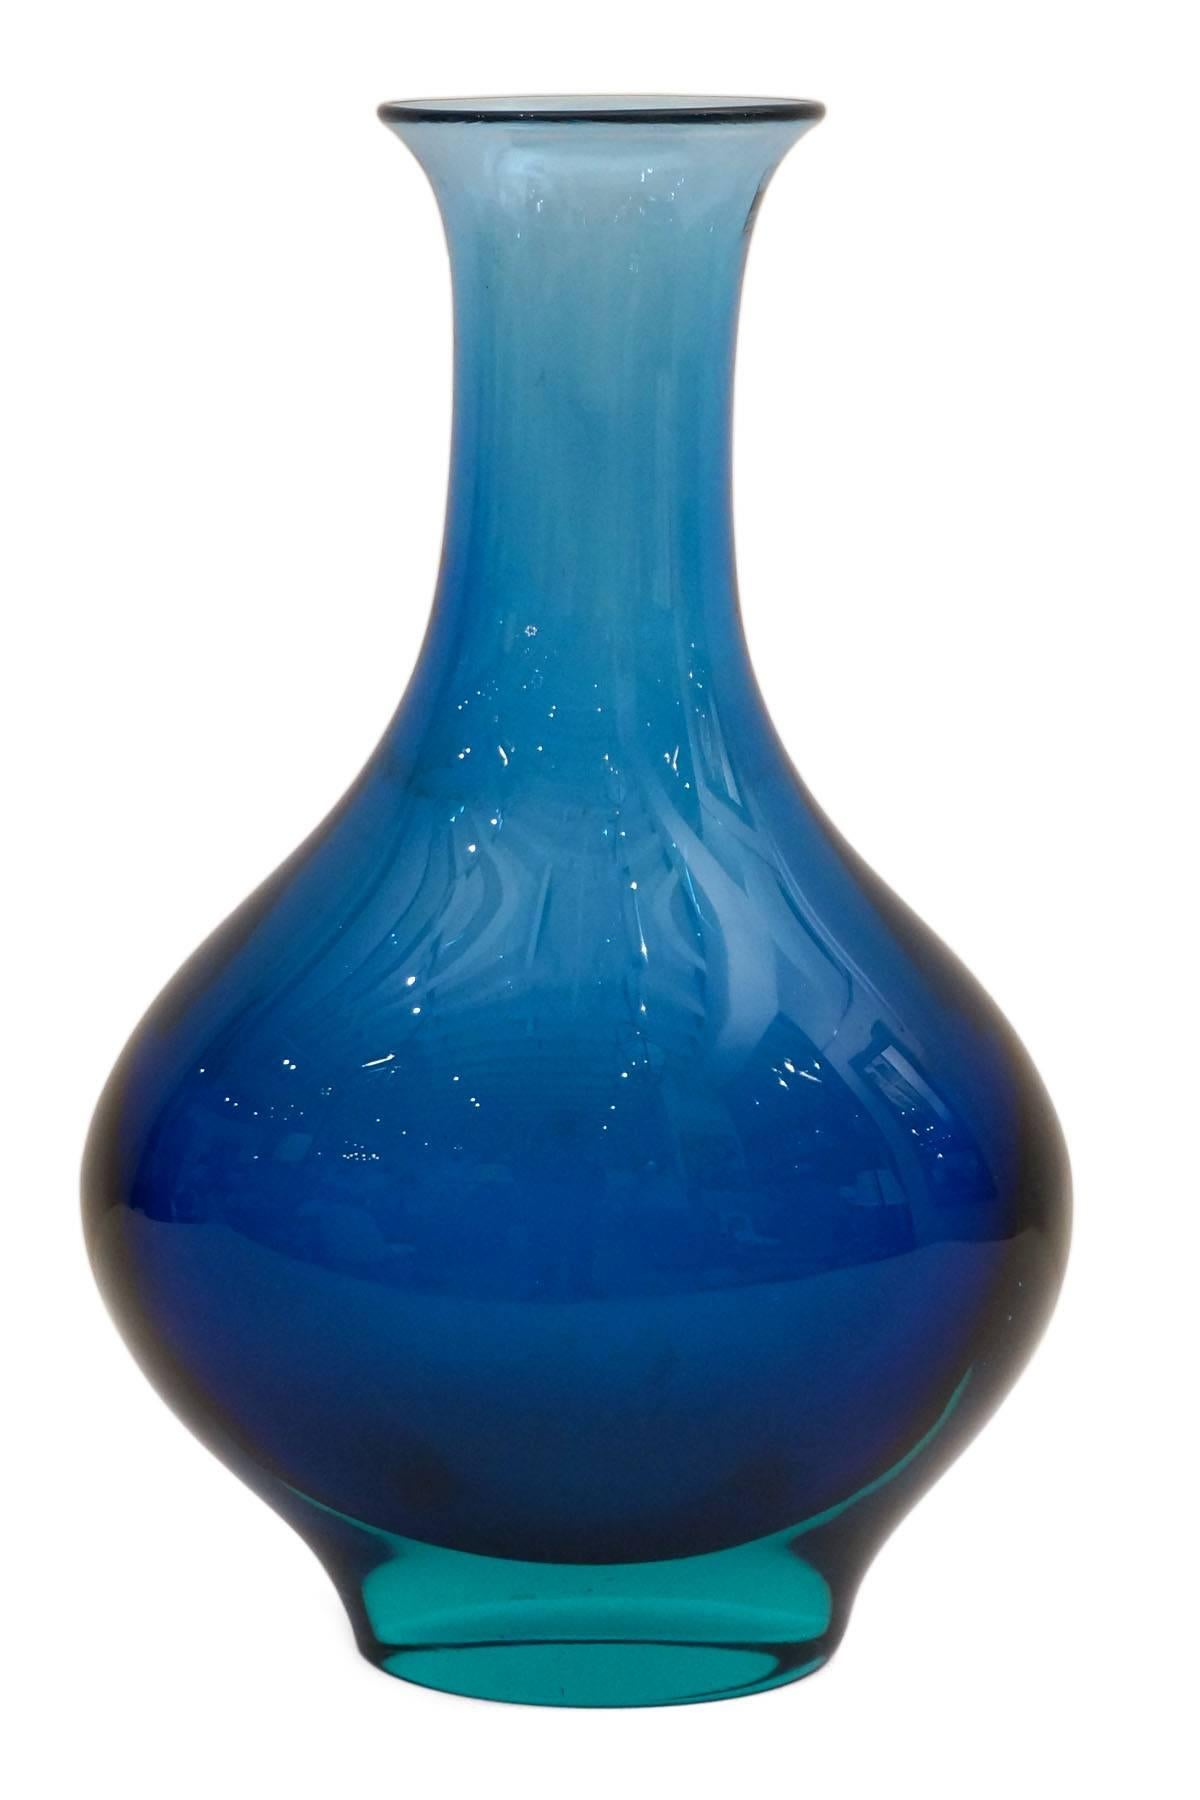 Fantastic, handblown large-scale Sommerso glass vase or vessel with blue and turquoise tones by Flavio Poli, for Archimede Seguso, Murano, Italy, circa 1950s.